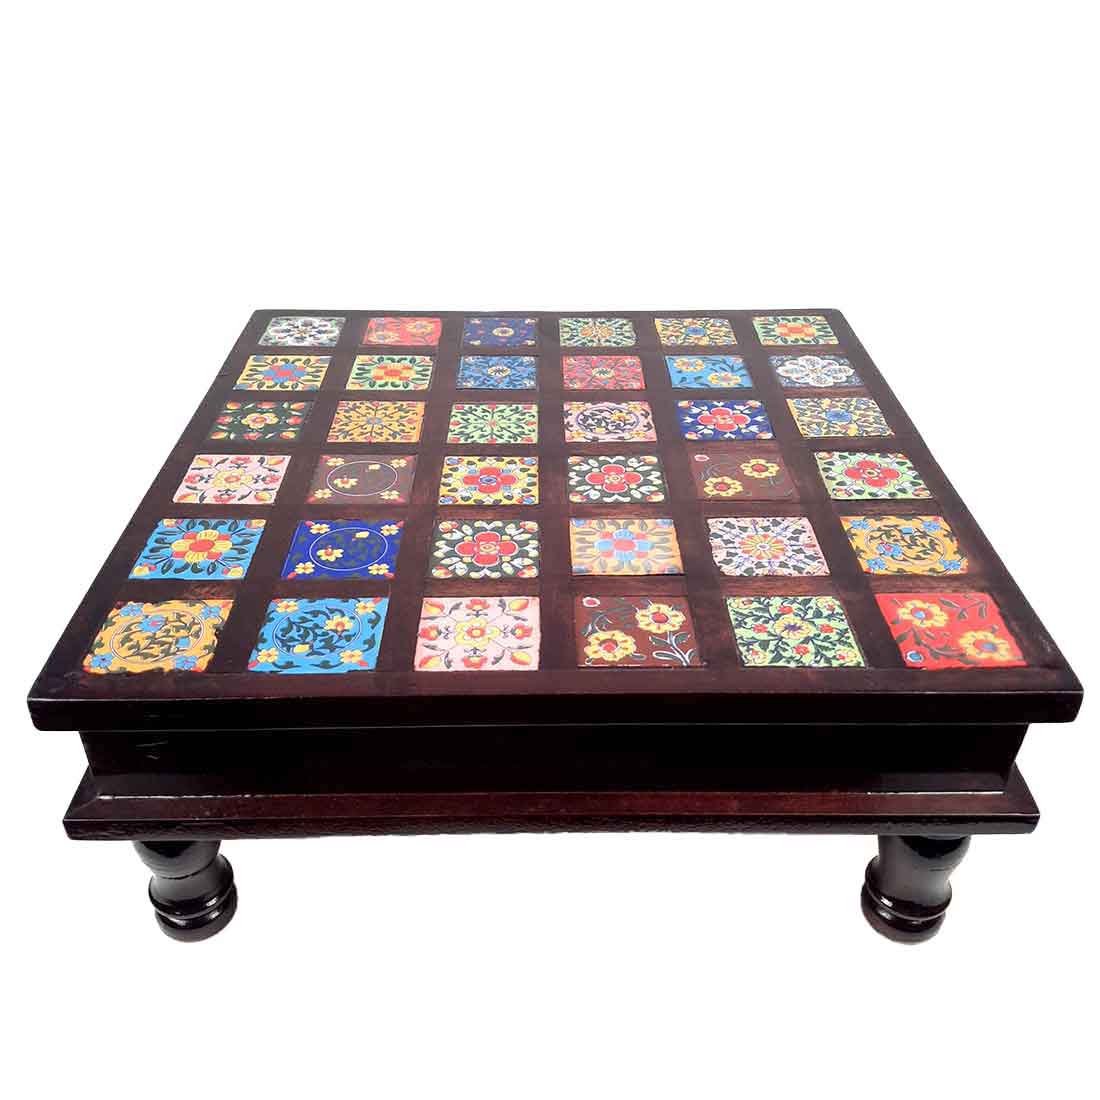 Wooden Chowki with Ceramic Tiles - For For Pooja, Weddings & Festivals - 13 Inches - ApkaMart